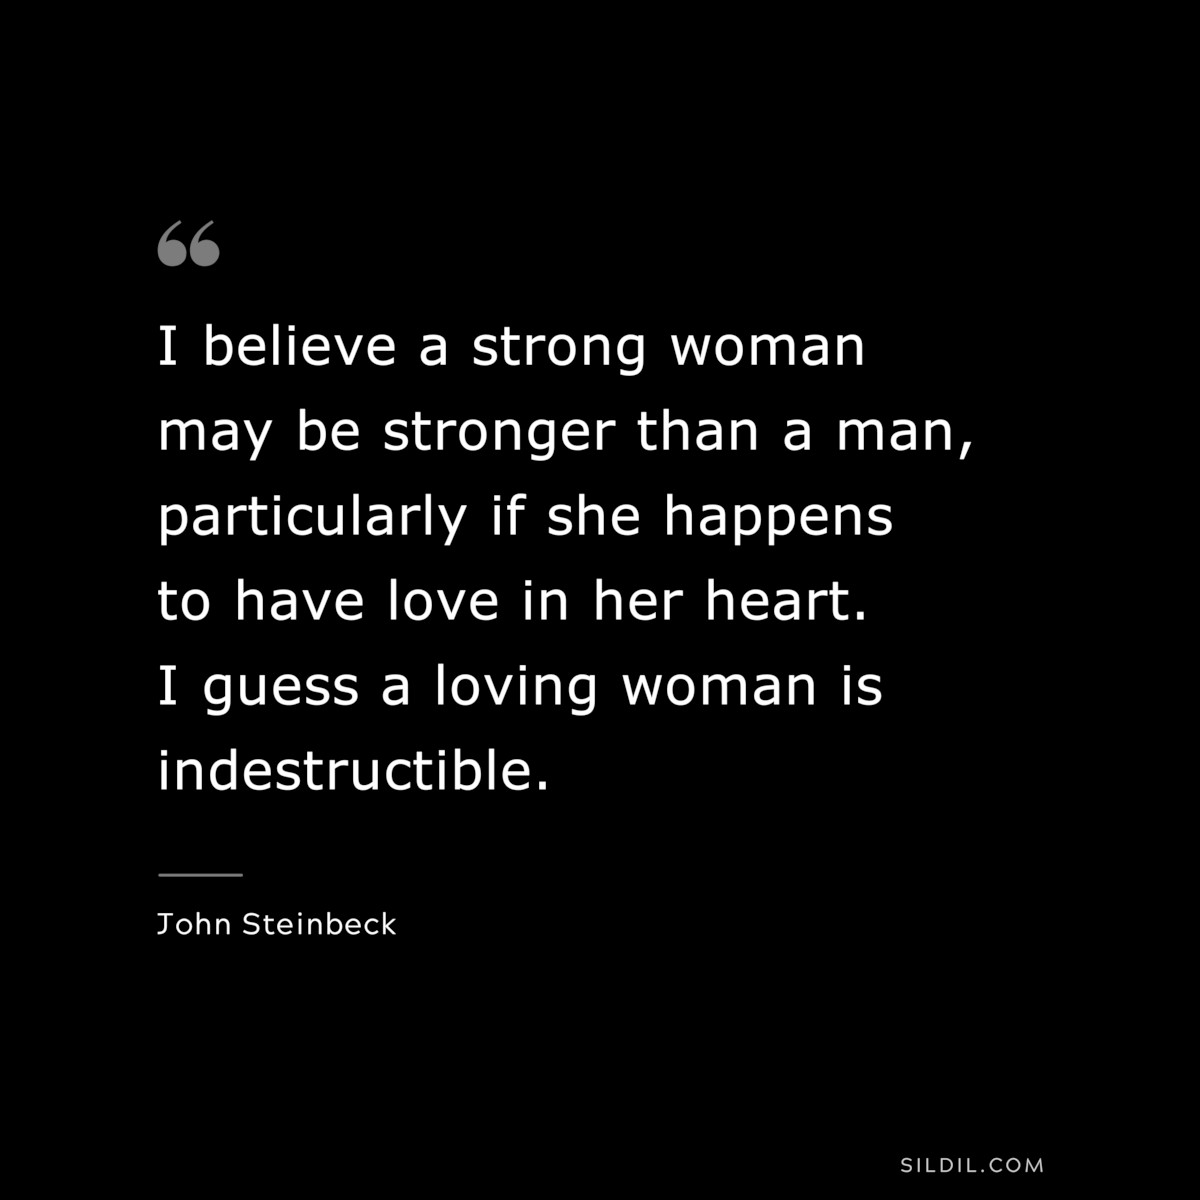 I believe a strong woman may be stronger than a man, particularly if she happens to have love in her heart. I guess a loving woman is indestructible.― John Steinbeck